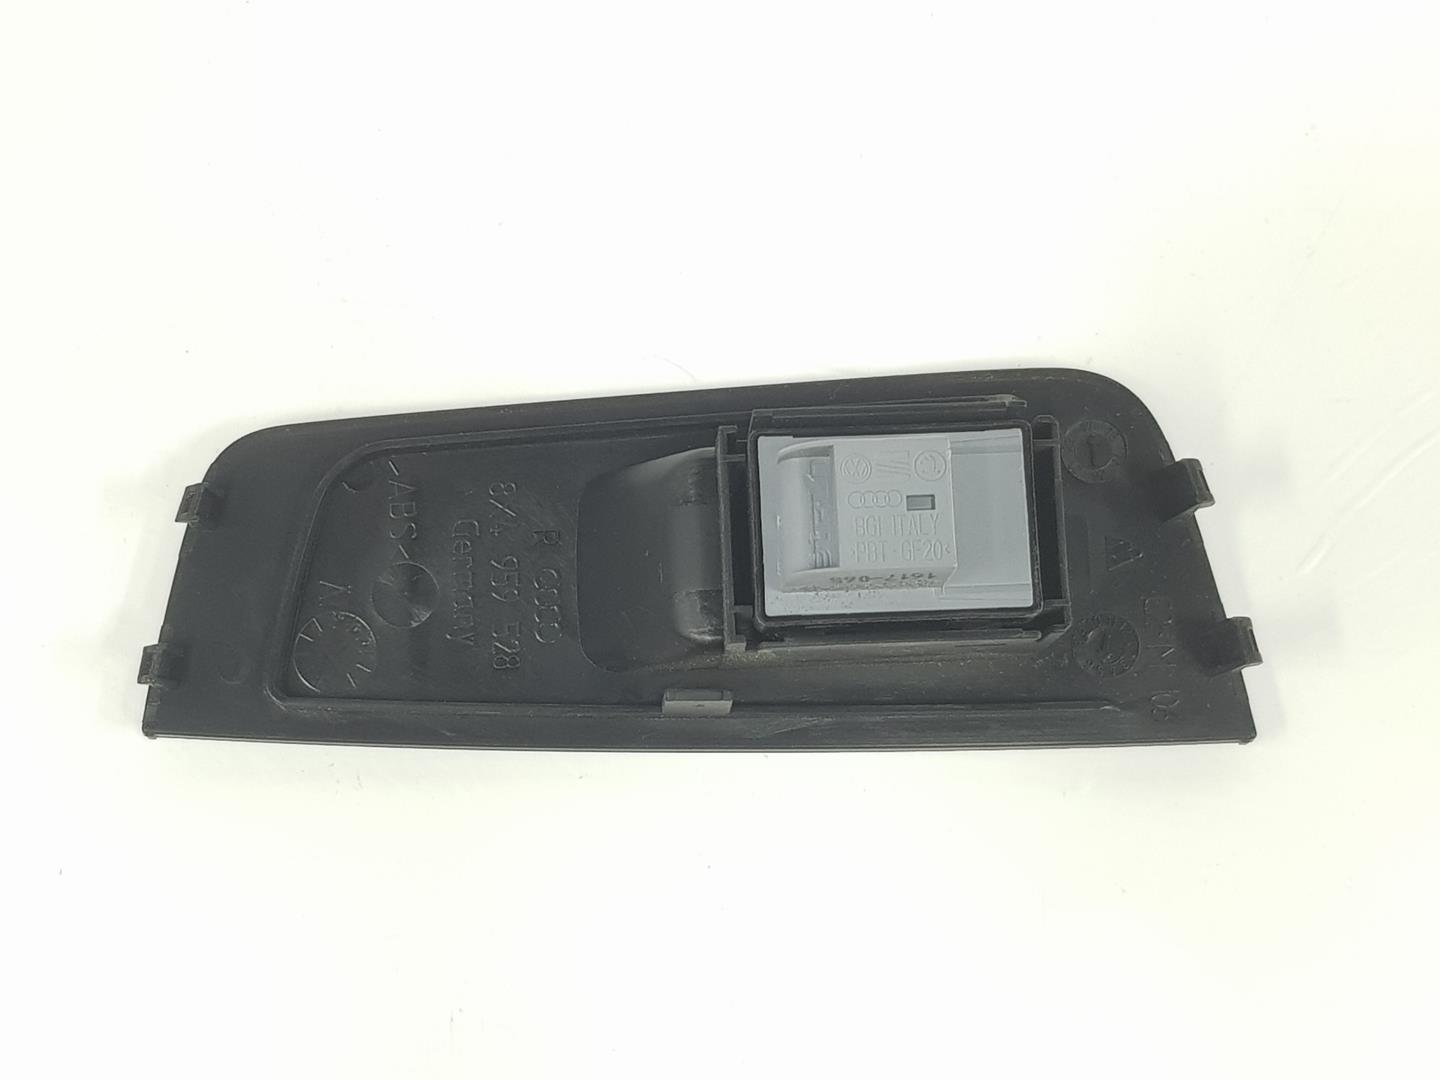 AUDI A7 C7/4G (2010-2020) Rear Right Door Window Control Switch 4H0959855A, 4H0959855A 19779218